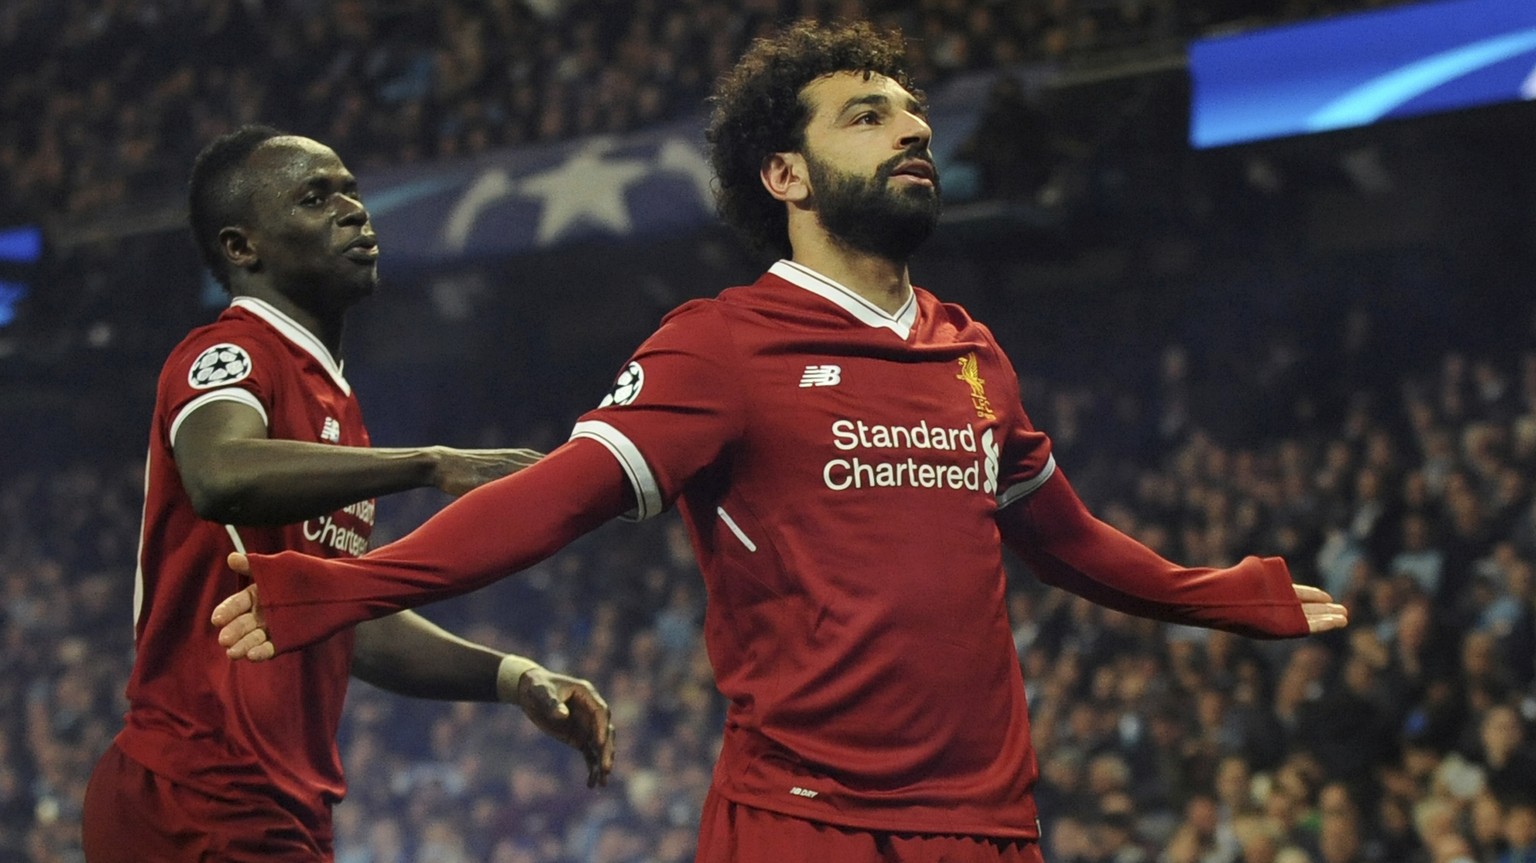 Liverpool&#039;s Mohamed Salah, right, celebrates scoring his side&#039;s first goal with Liverpool&#039;s Sadio Mane during the Champions League quarterfinal second leg soccer match between Mancheste ...